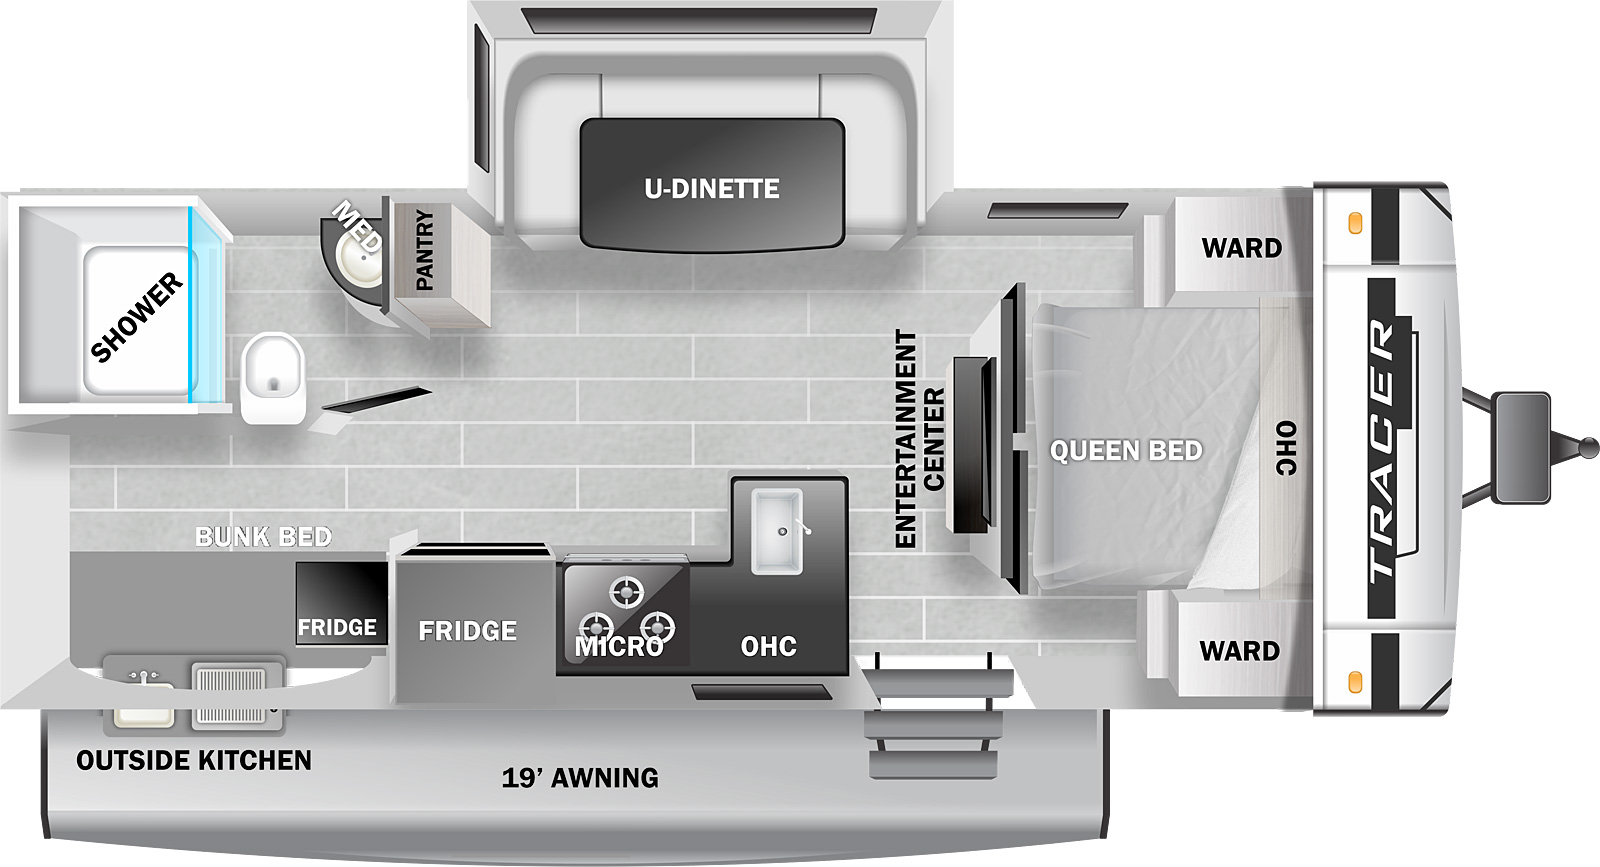 The Tracer 24DBS floorplan has one entry door, a 19 foot power awning, an outside kitchen with a sink and grill, and one slideout. The entry door leads to the living area on the left and the bedroom on the right. Directly to the left of the entry door is an L-shaped counter top with a sink and stove. A microwave is above the stove. Overhead storage is above the countertop to the right of the microwave. To the left of the countertop is a refrigerator. Bunk beds are in the rear door side corner of the RV. The rear off door corner has a door leading to the bathroom. The bathroom has a toilet, shower, and sink with a medicine cabinet above. Directly to the right of the bathroom, on the off door side, is a pantry. The living area slideout is on the off door side and has a U-dinette. The front wall of the living area has an entertainment center. Sliding doors are on the left and right of the entertainment center. The sliding doors both lead to the bedroom. The bedroom has a queen bed with a wardrobe and night stand on the right and left and overhead storage above.